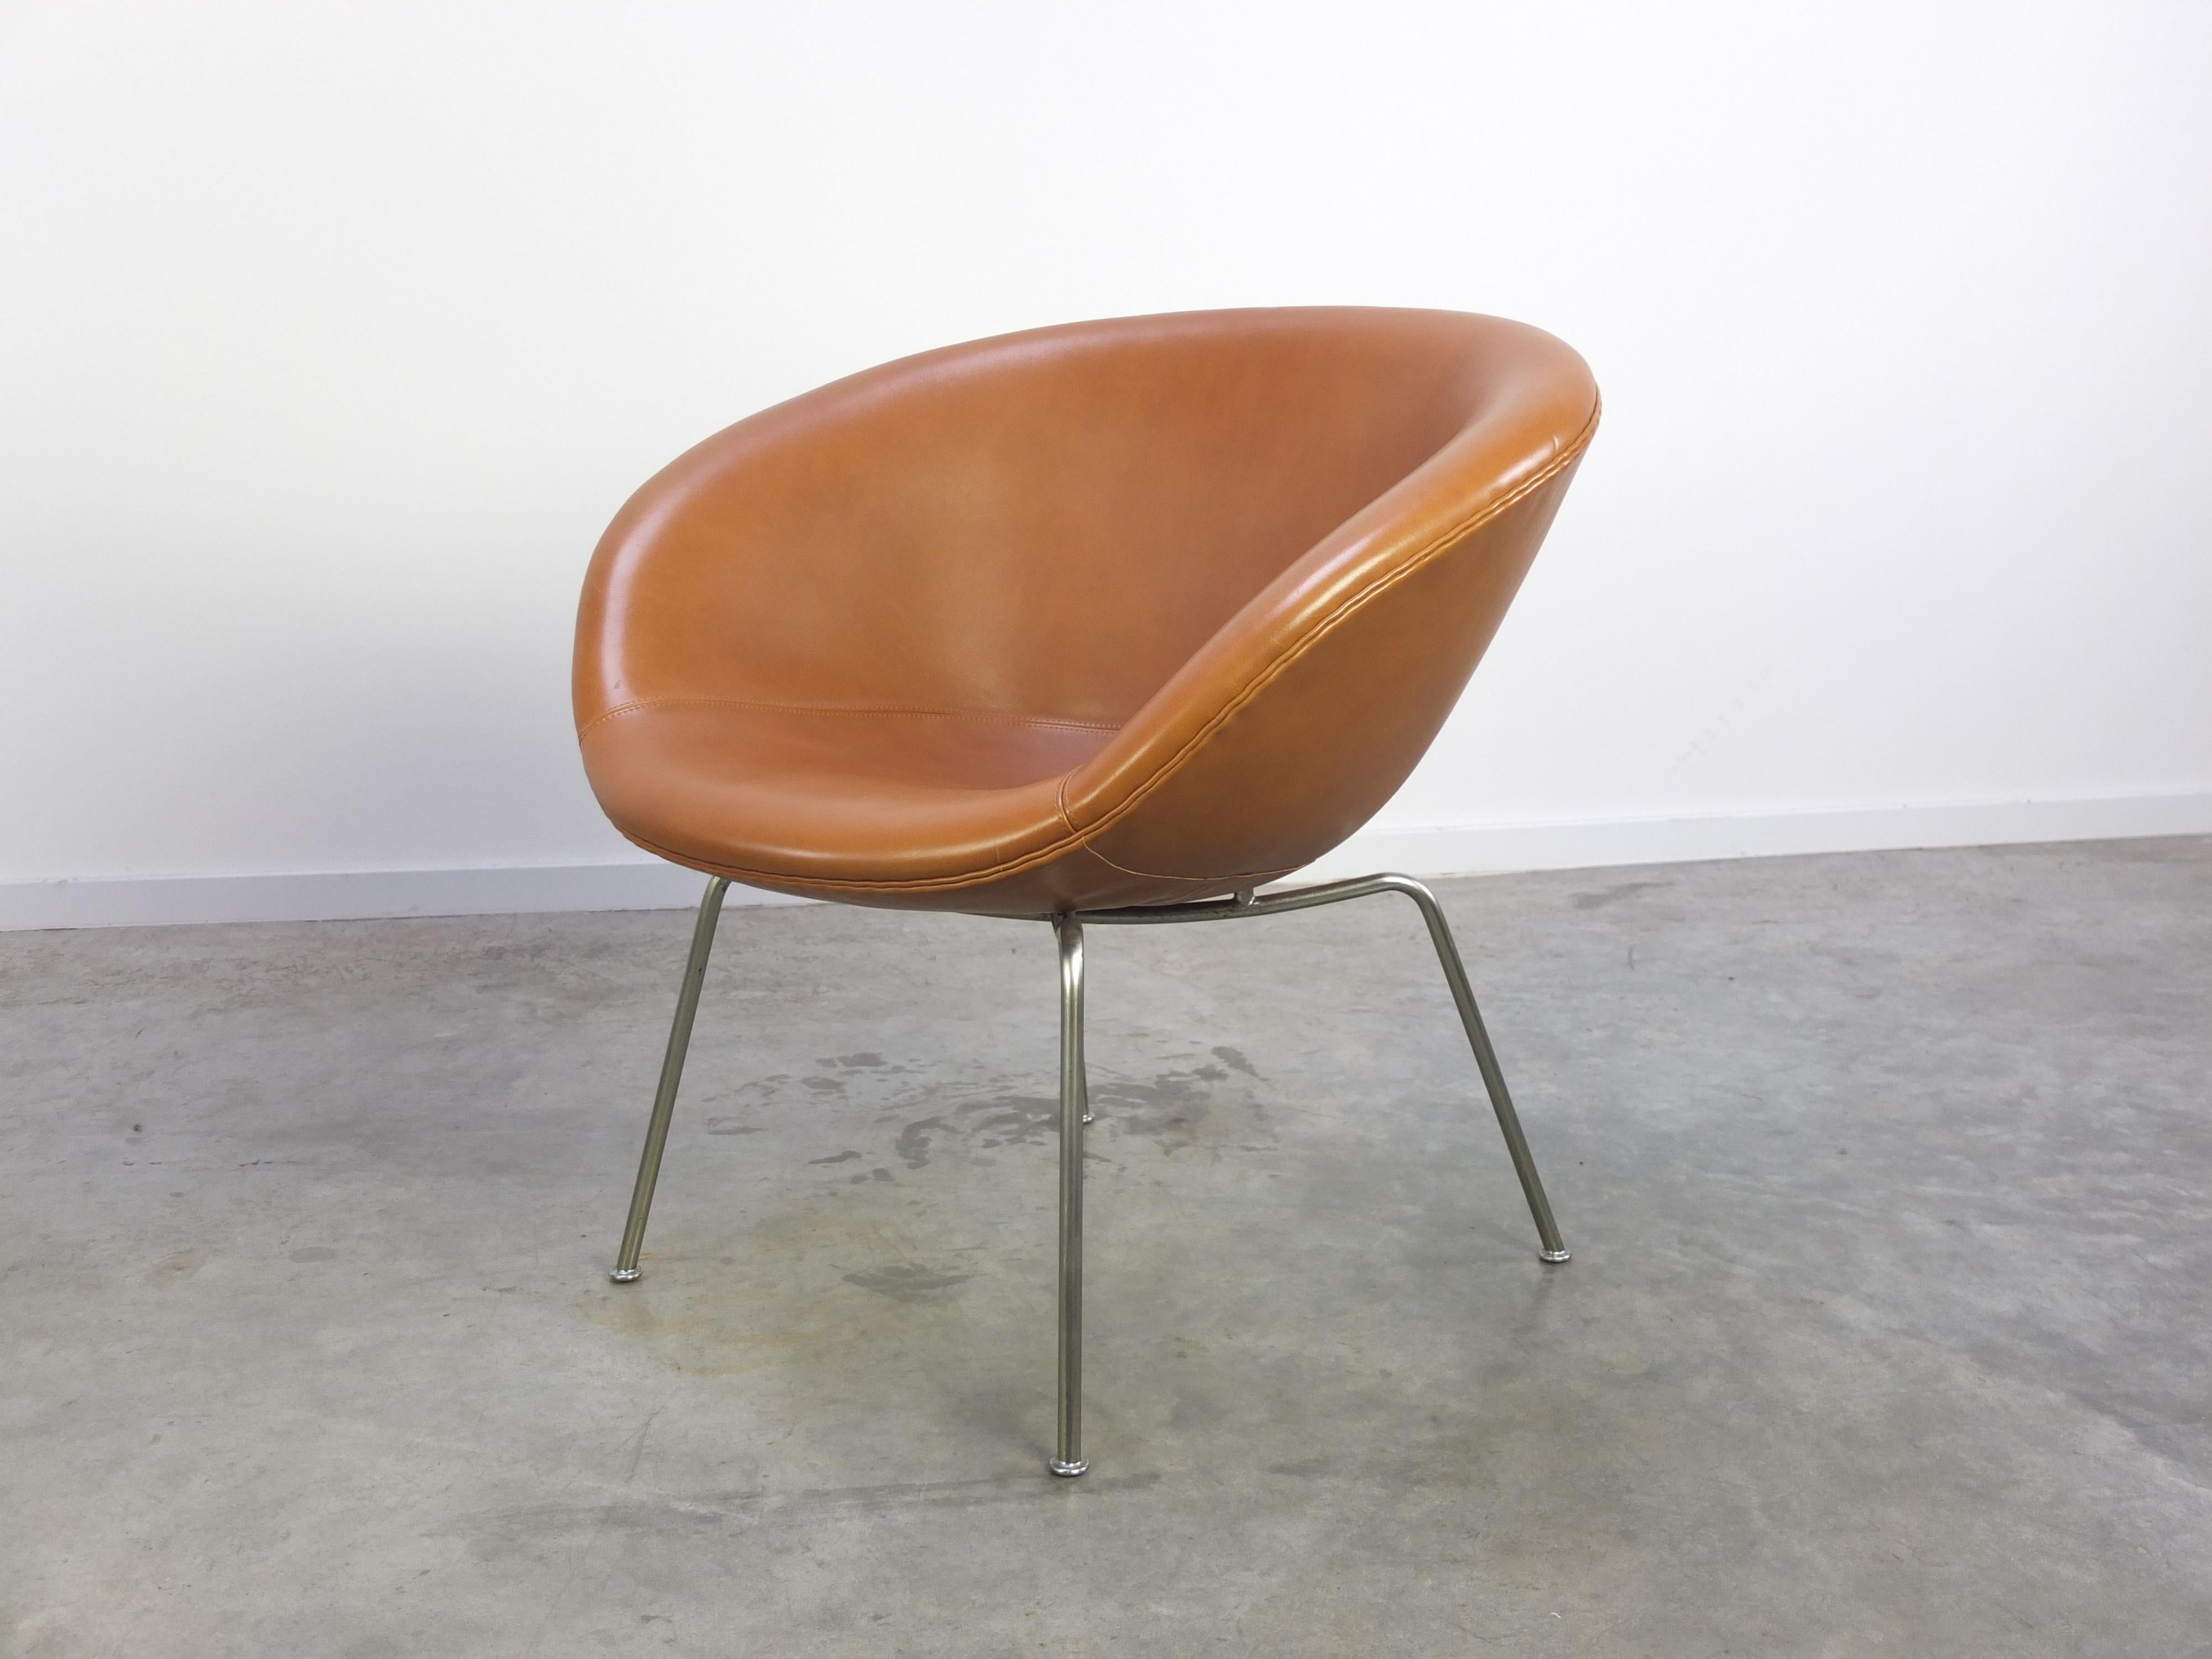 Early Pair of 'Pot' Lounge Chairs by Arne Jacobsen for Fritz Hansen, 1950s For Sale 7